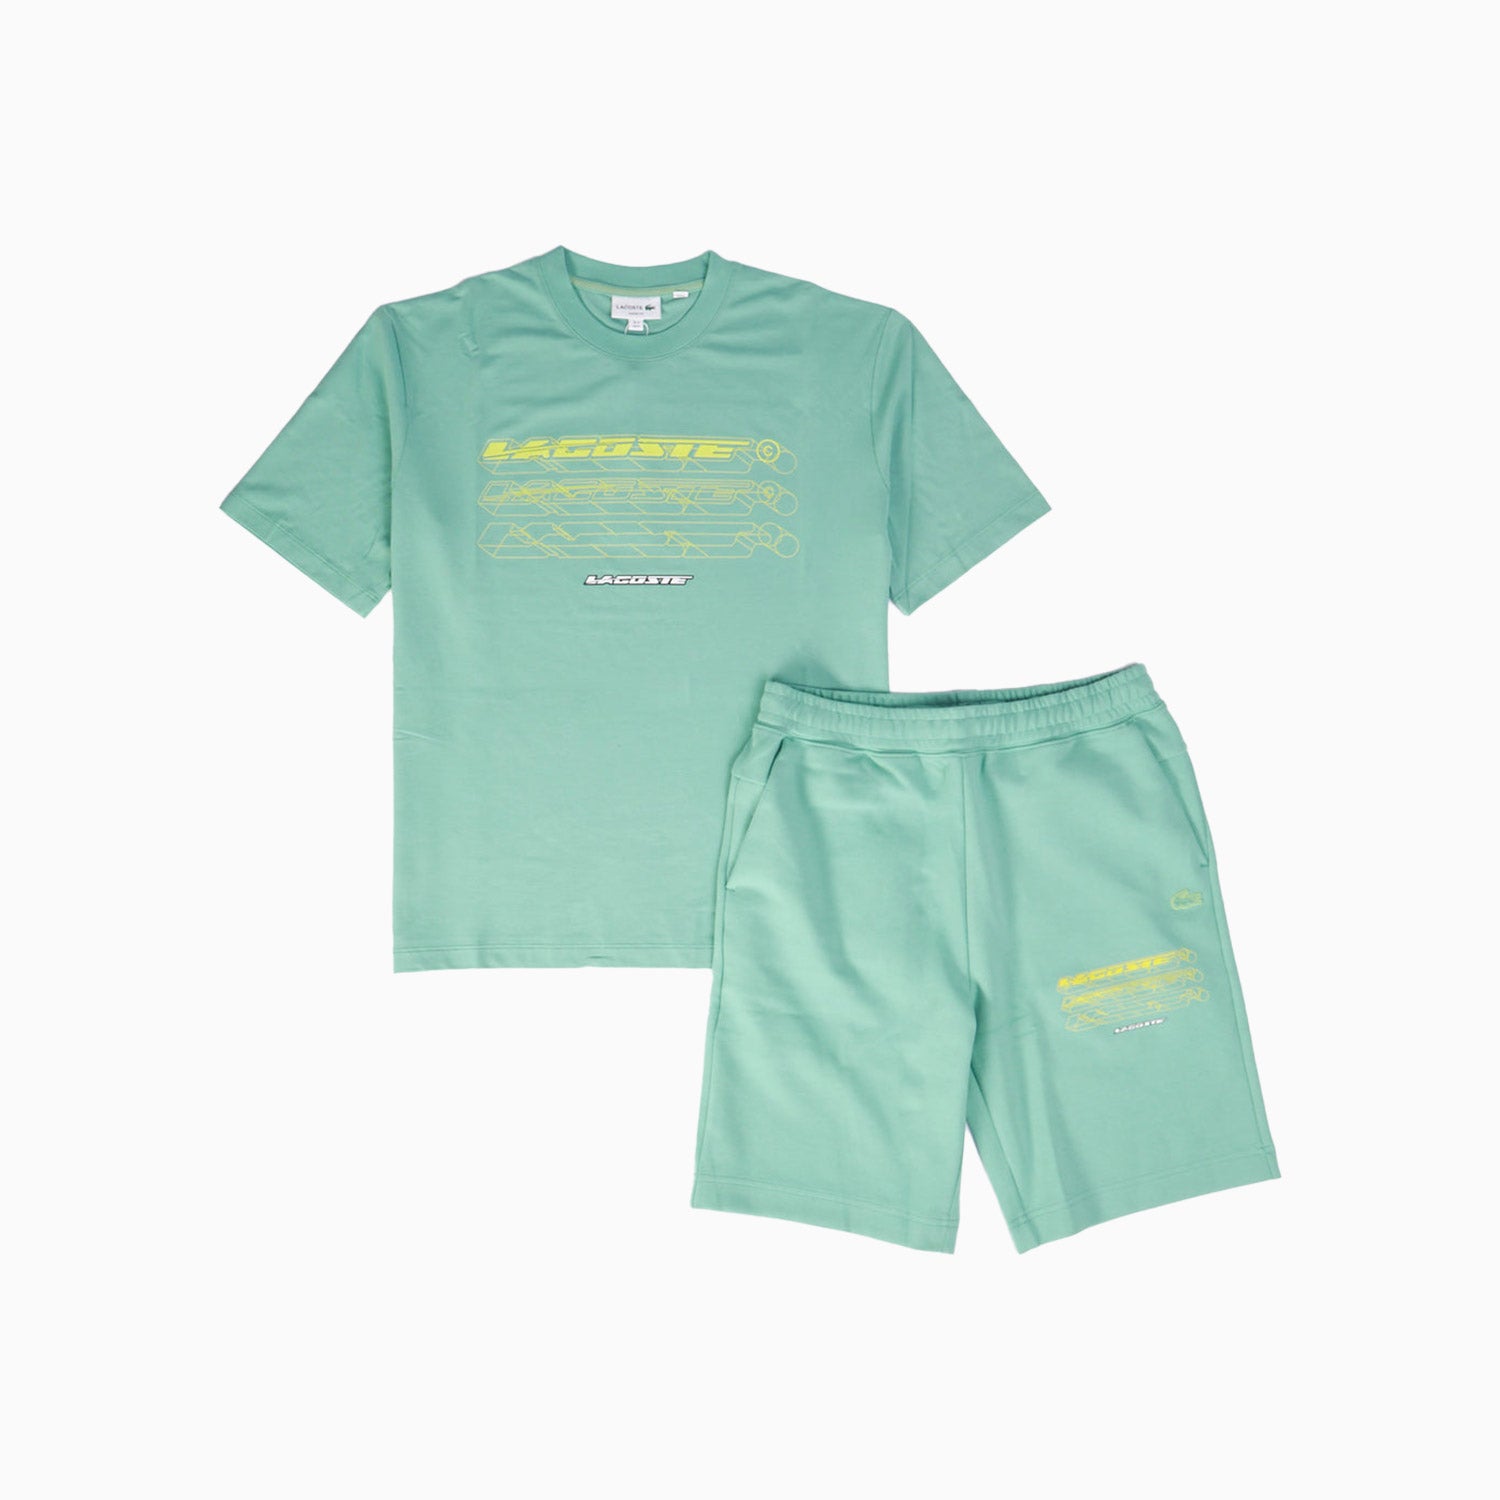 lacoste-mens-loose-fit-organic-cotton-pique-t-shirt-and-shorts-outfit-th5529-3a4-gh5539-3a4